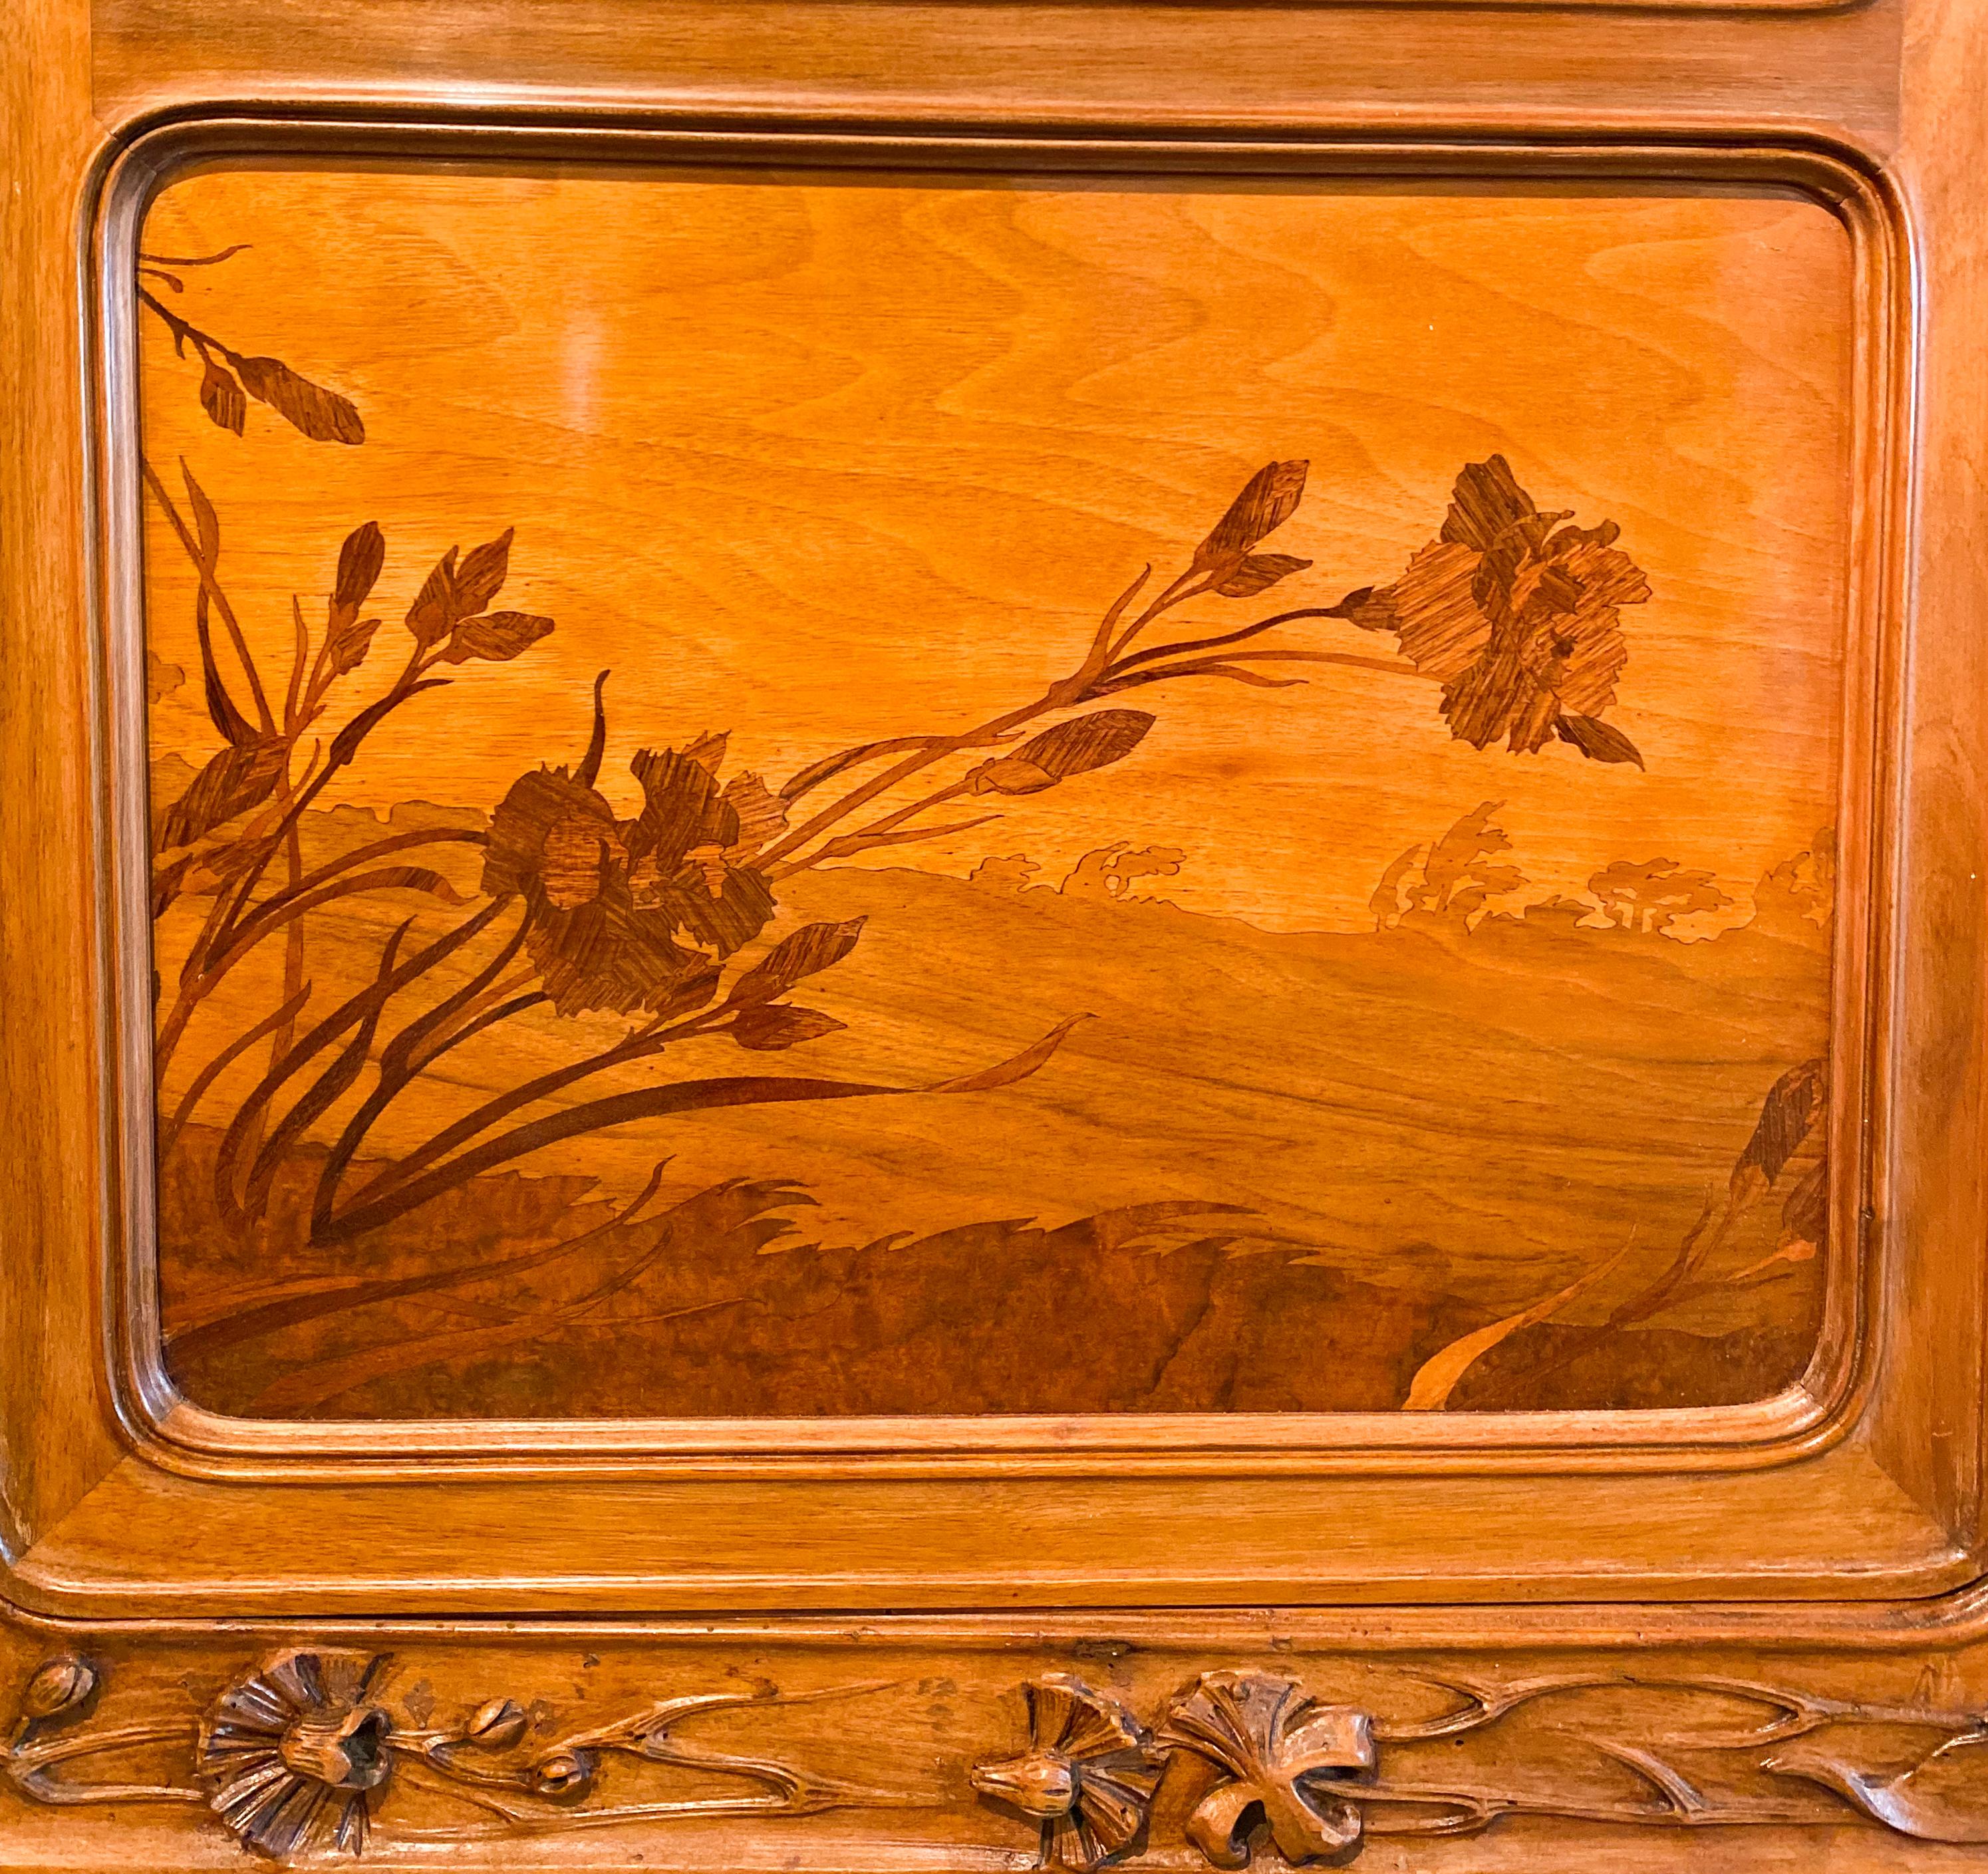 An early 20th century fine and rare French Art Nouveau carved and inlaid Marquetry 